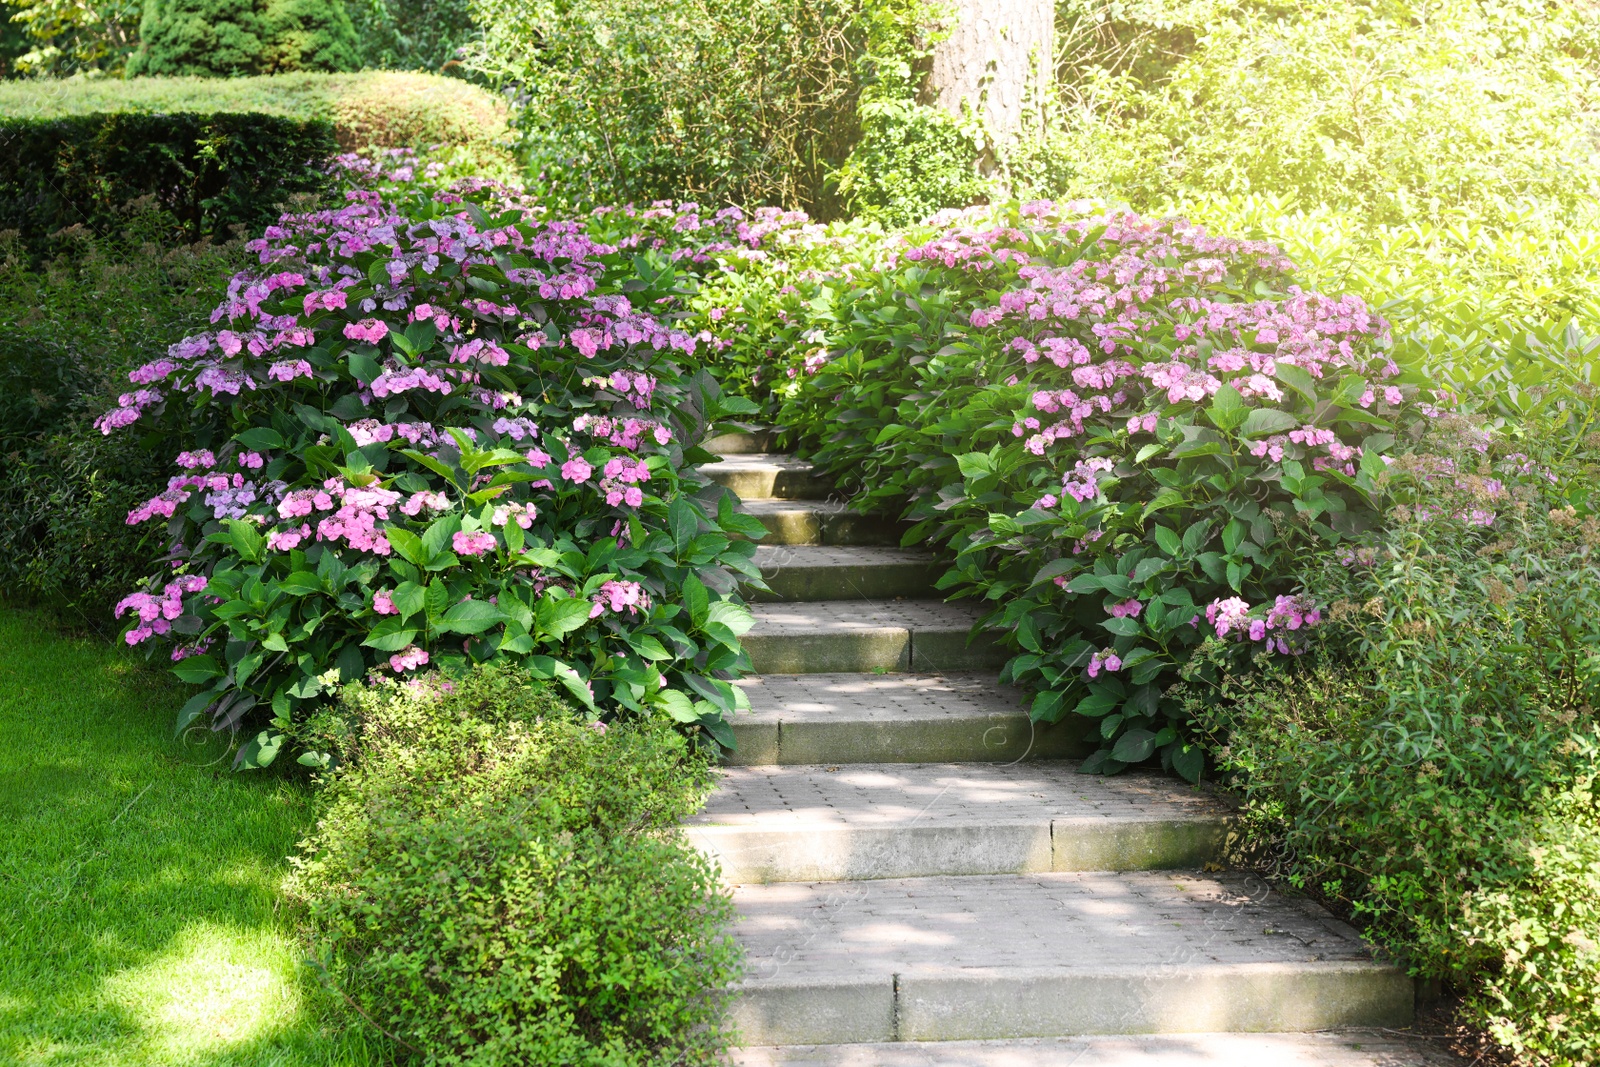 Photo of Pathway among beautiful hydrangea shrubs with violet flowers outdoors